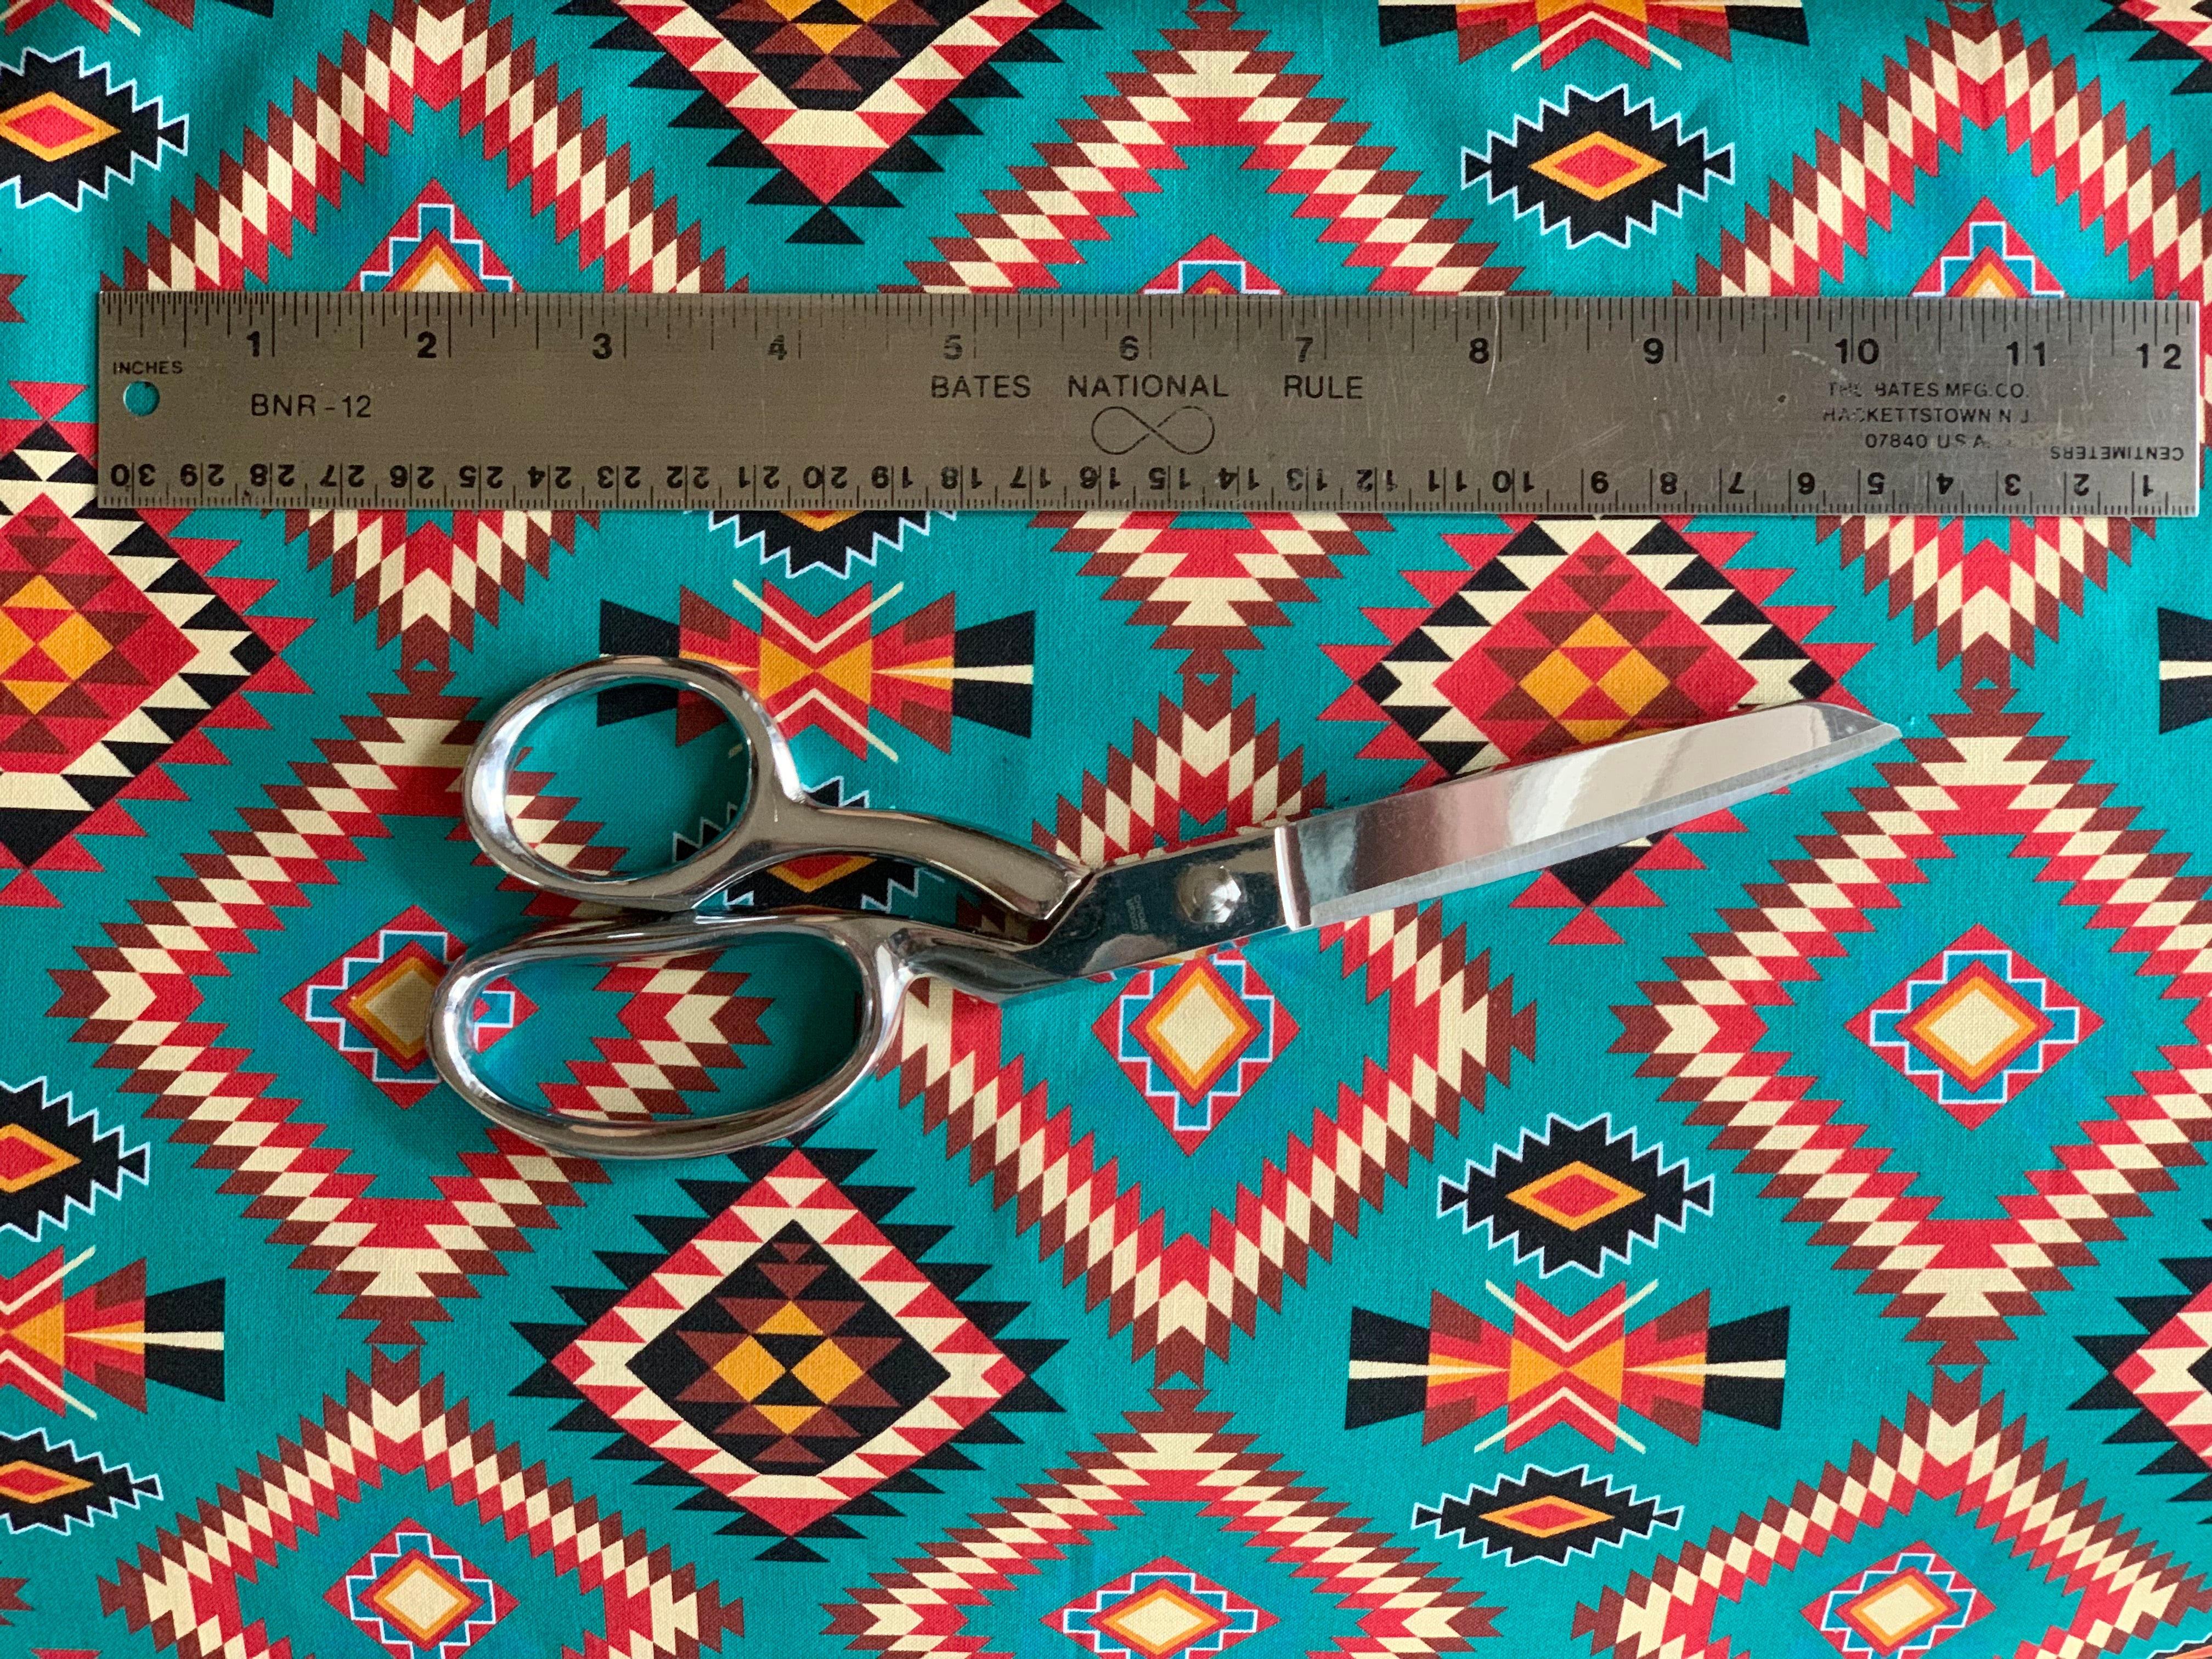 Tribal Cultural Southwest Native Fabric - 50 Teal